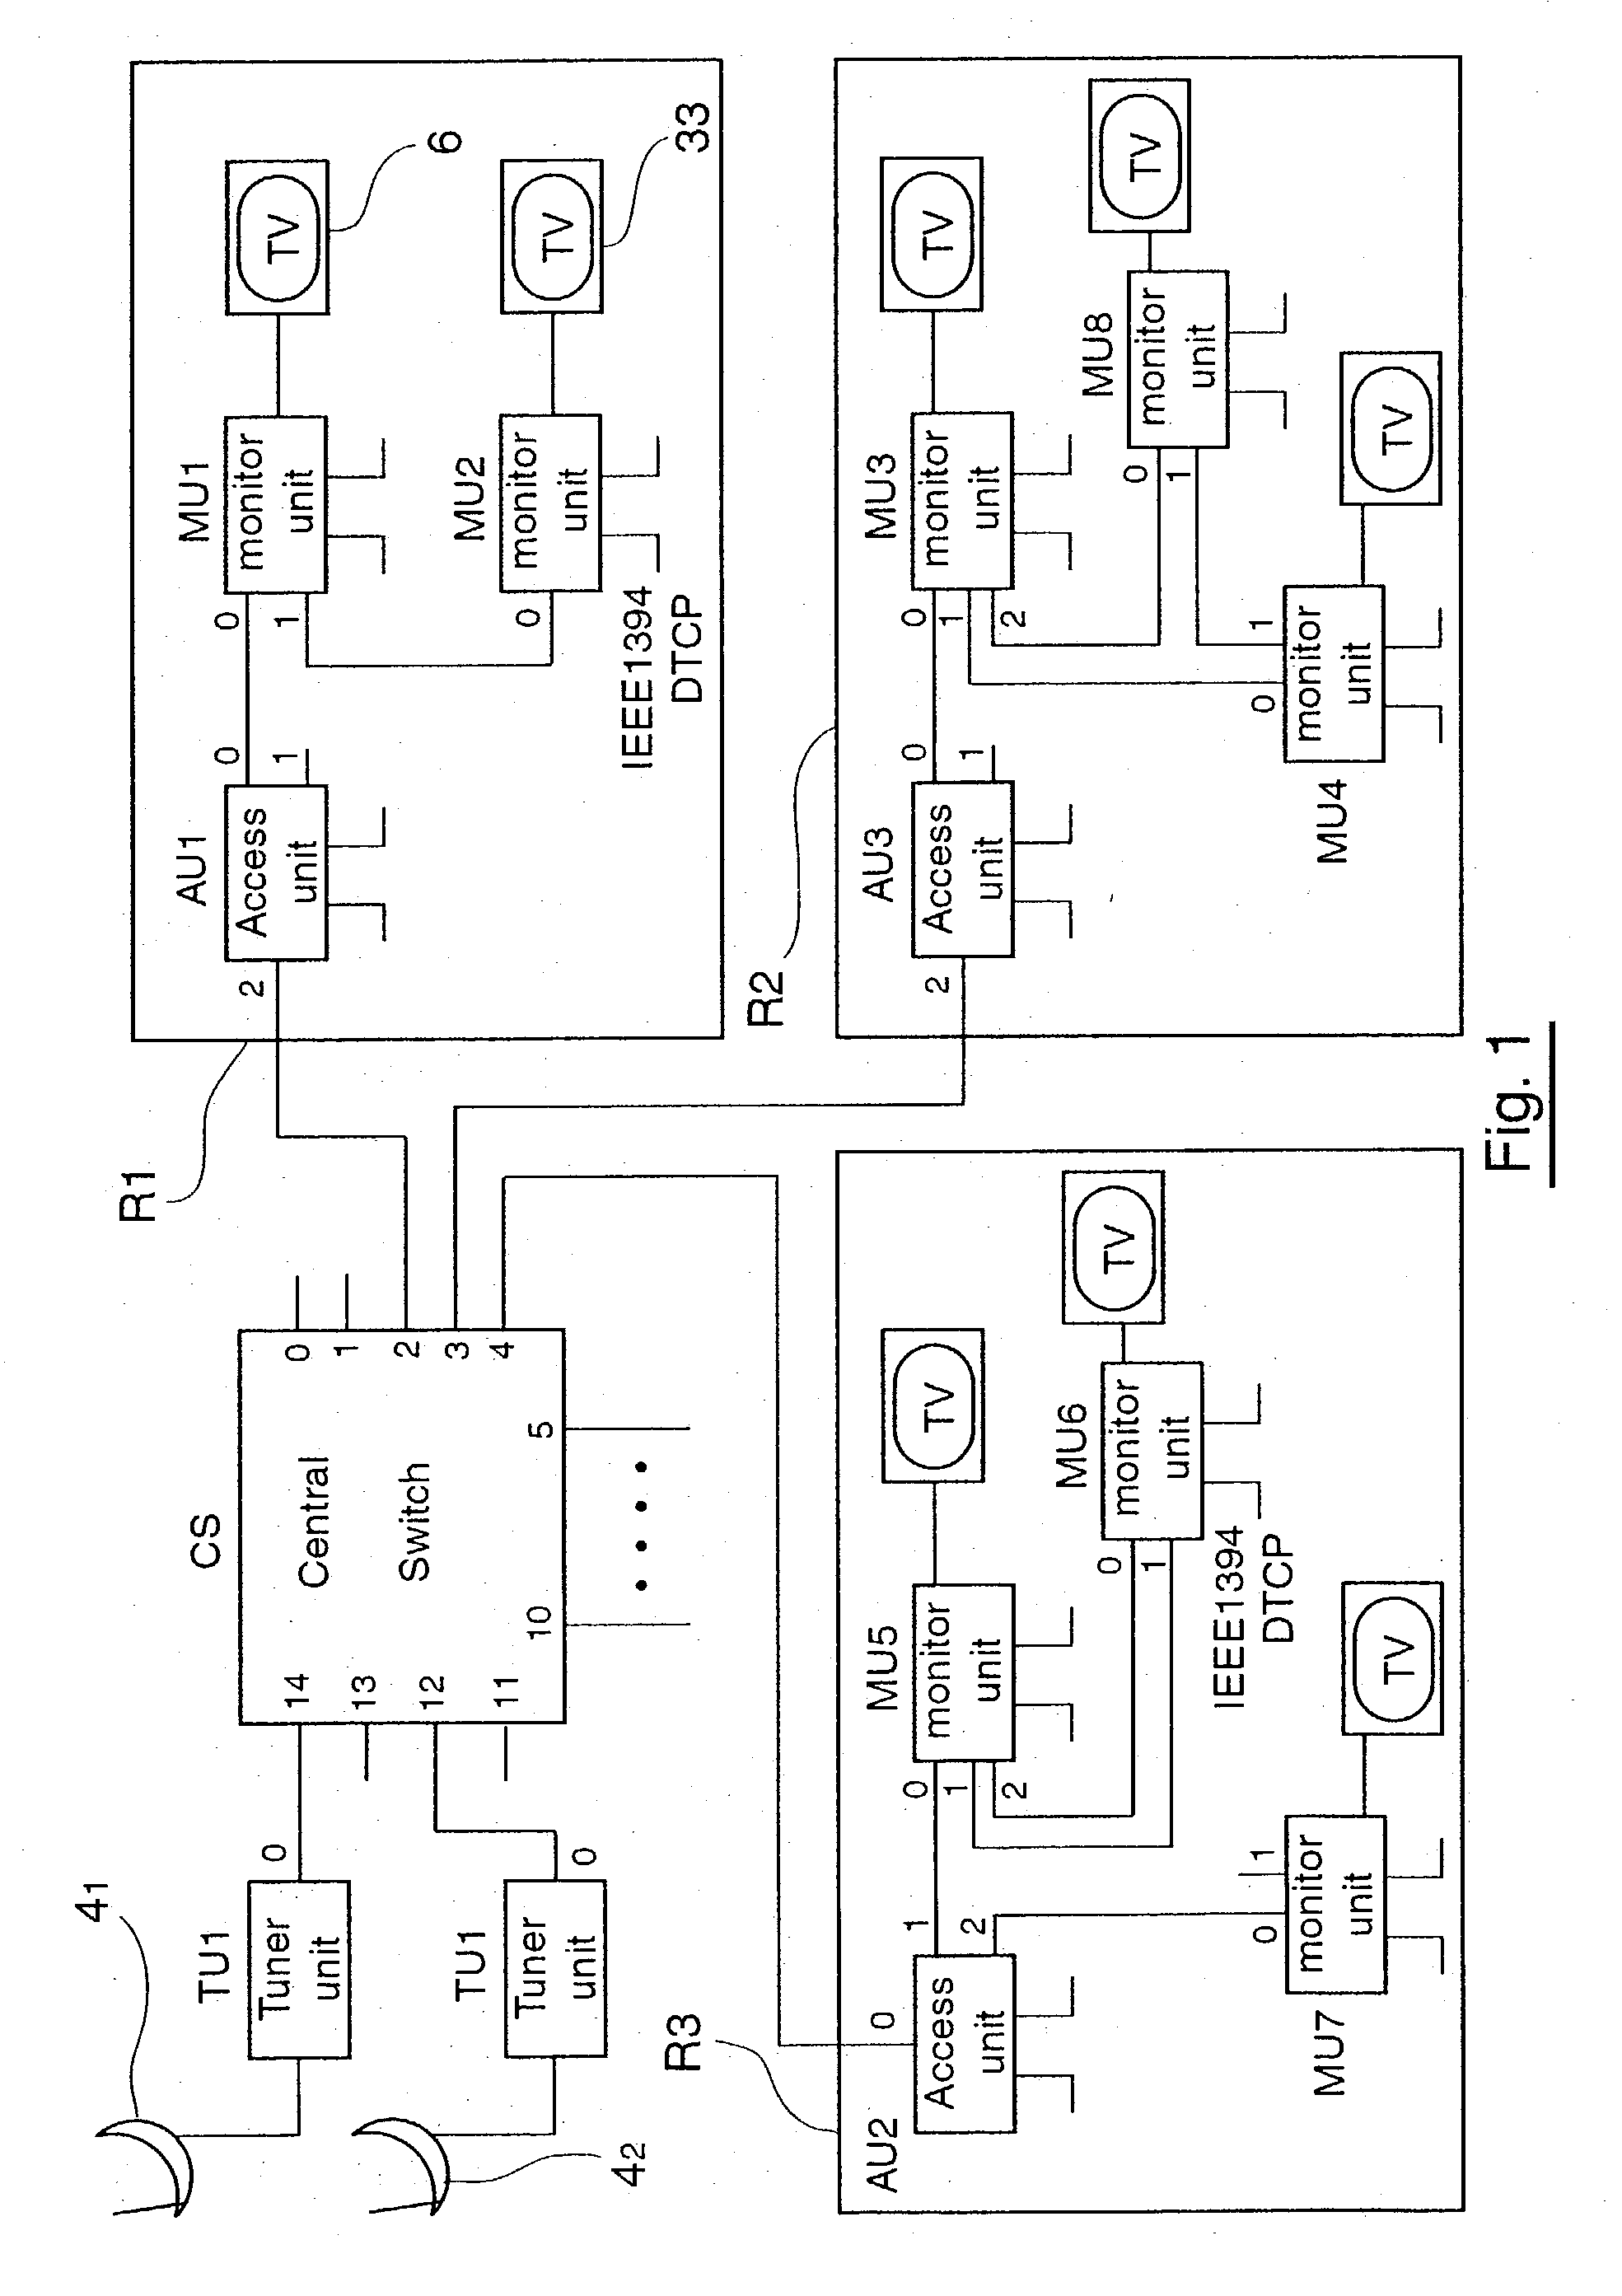 System for the transmission of audiovisual signals between source nodes and destination nodes